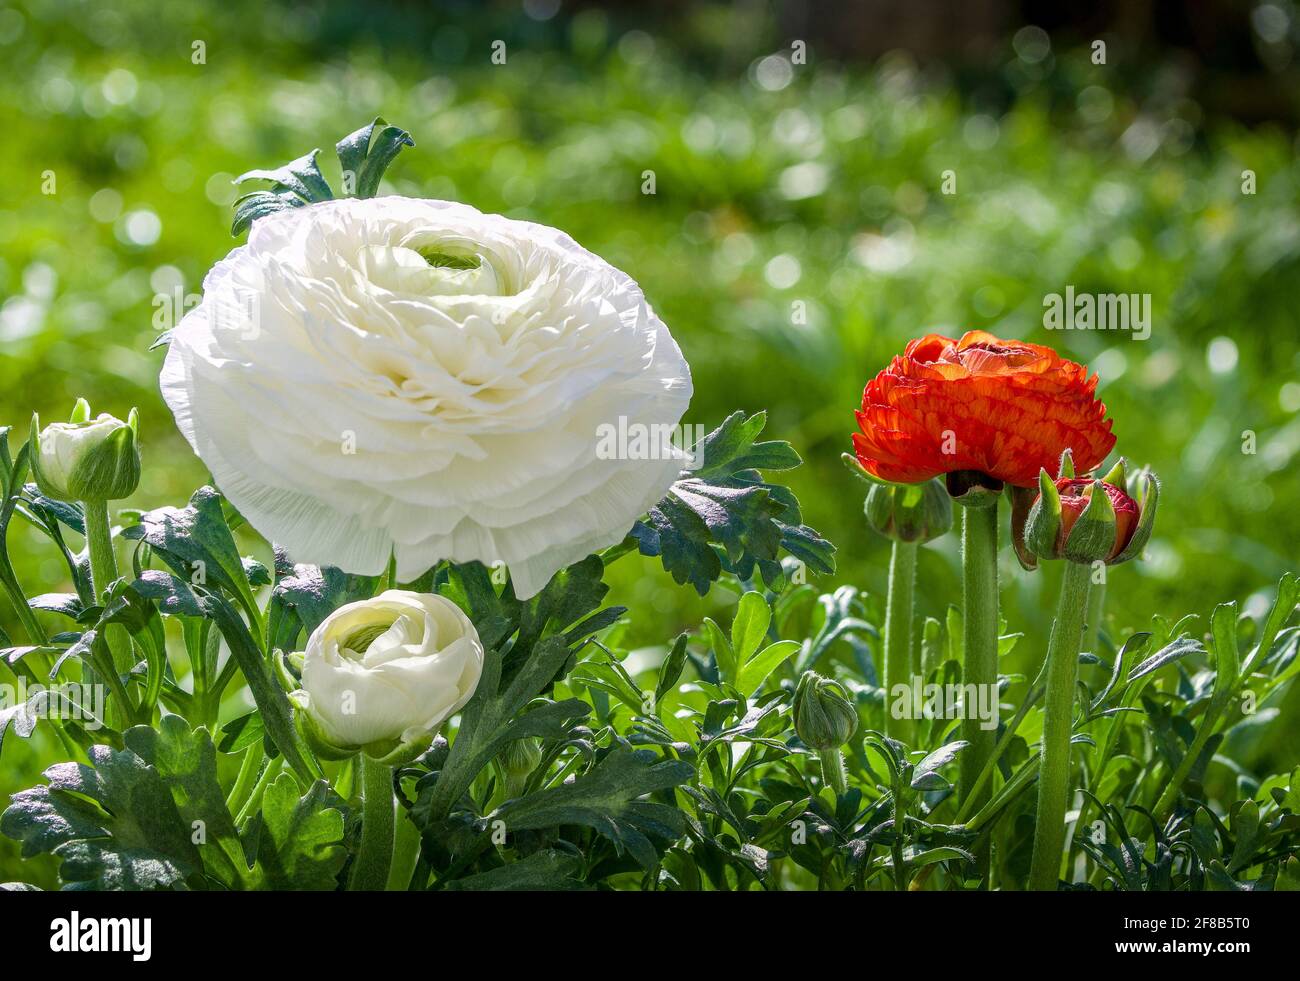 Persian Buttercup (Ranunculus asiaticus), flower and buds, Bavaria, Germany, Europe Stock Photo